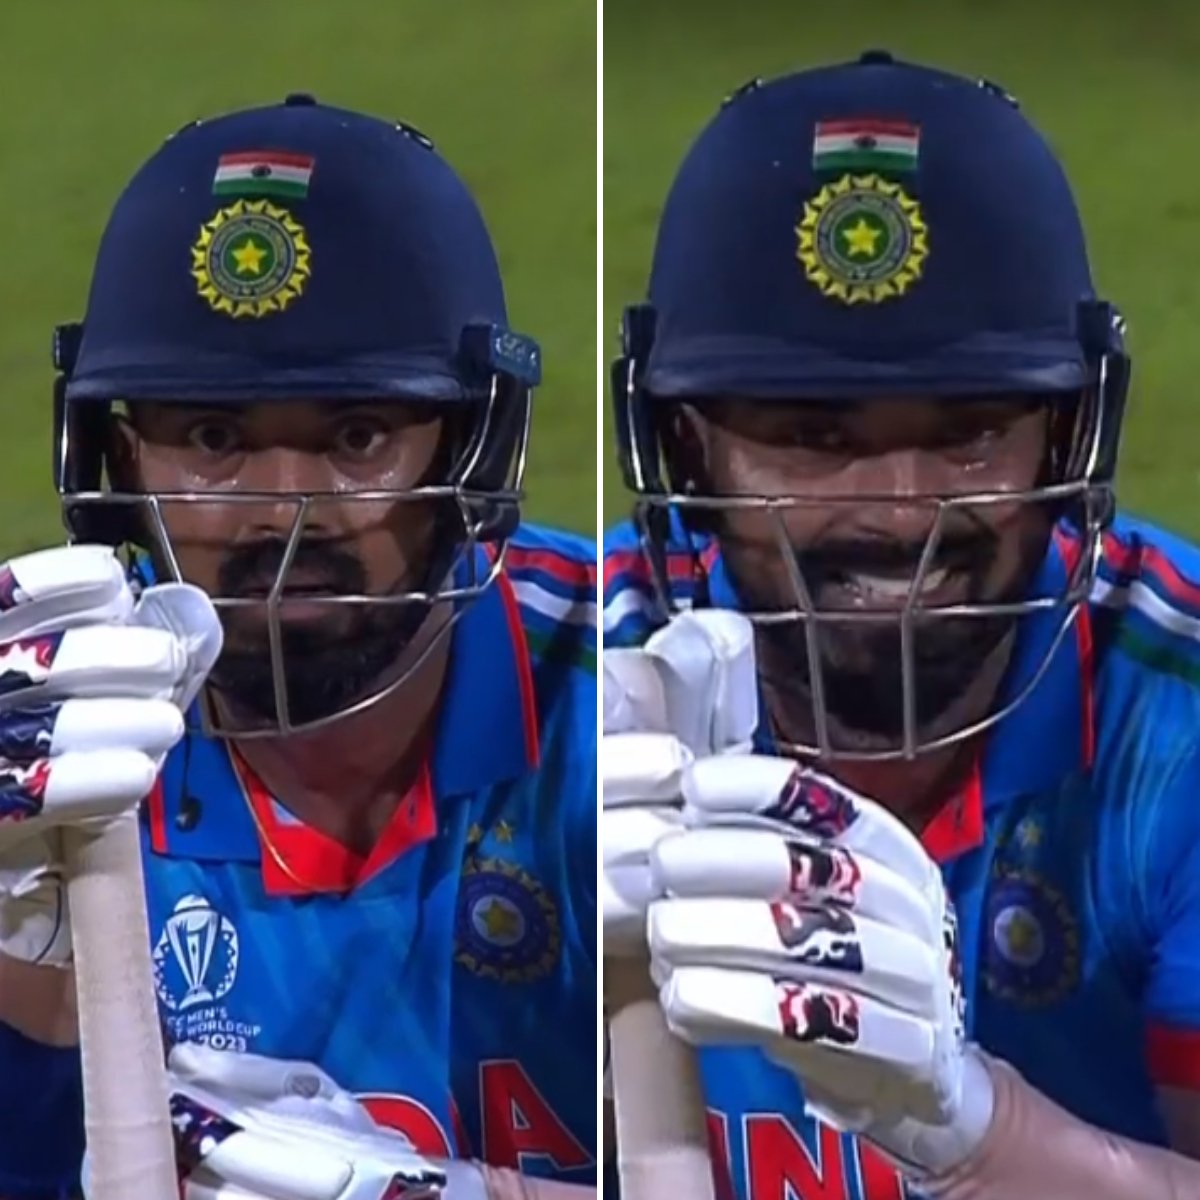 KL Rahul's reaction, realizing he hit a six instead of a four while being stranded on 97, was indeed pure gold! 🏏🤣 #KLRahul #CricketFun #INDvAUS 📸🌟